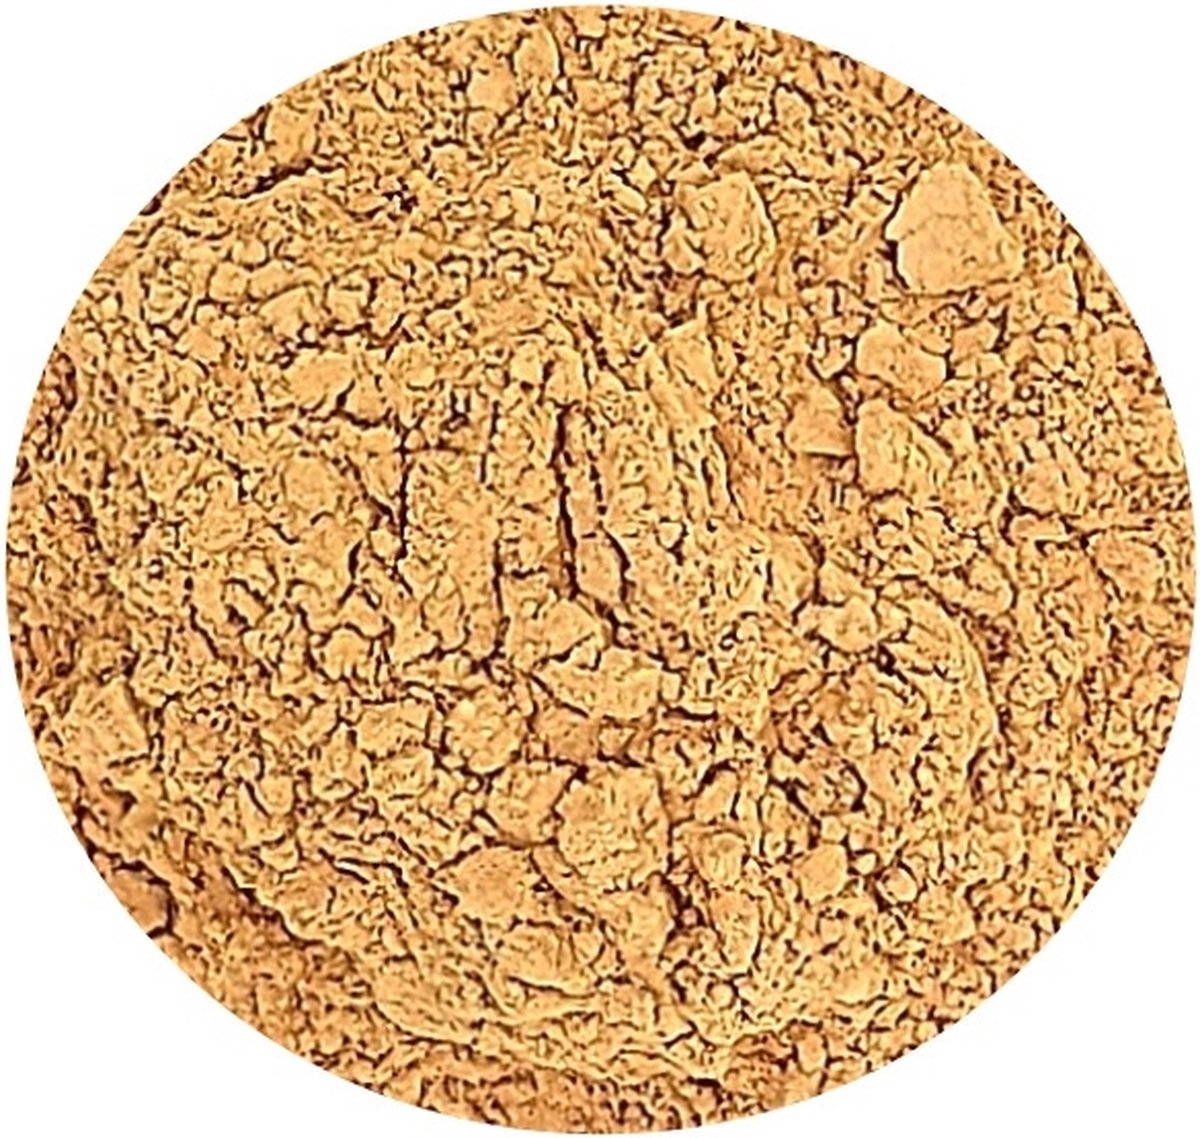 Earth Velvet Touch Mineral Foundation - by Jan Benham Cosmetics 100% Natural & Organic 7g - Cool Skin Type